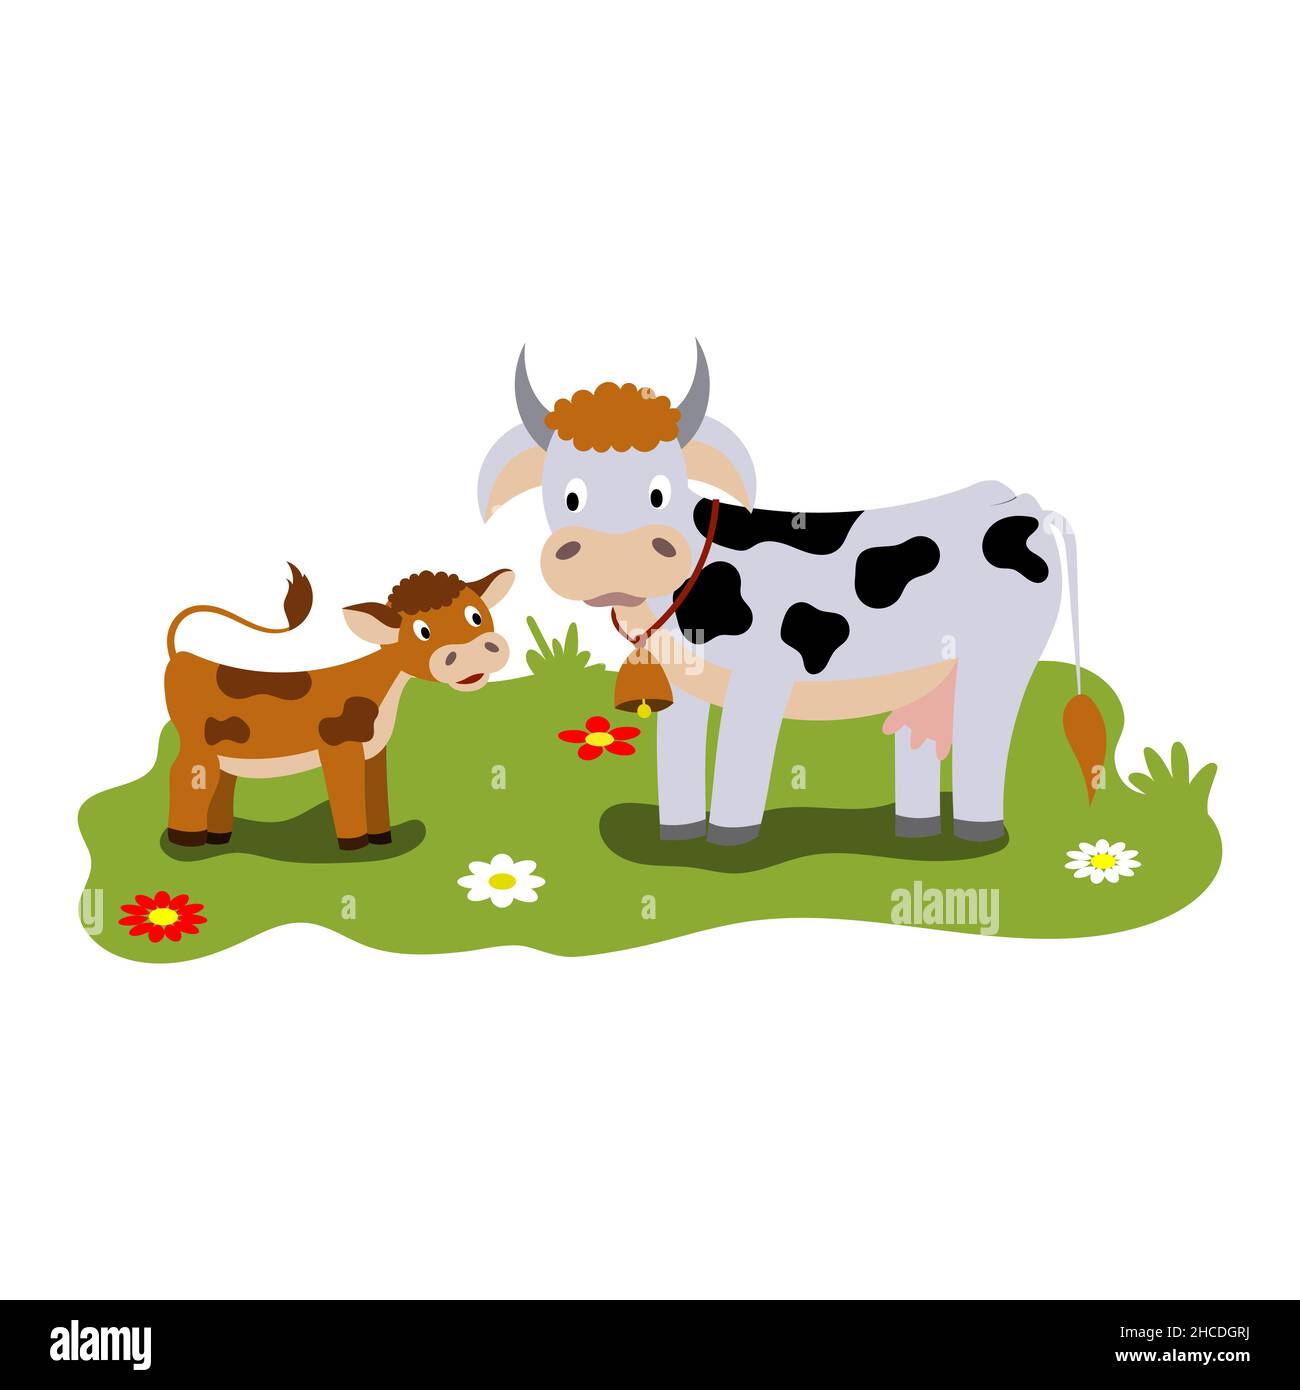 Cute cartoon illustration of mom and kids, farm animal cow and calf. Vector isolated on a white background Stock Vector